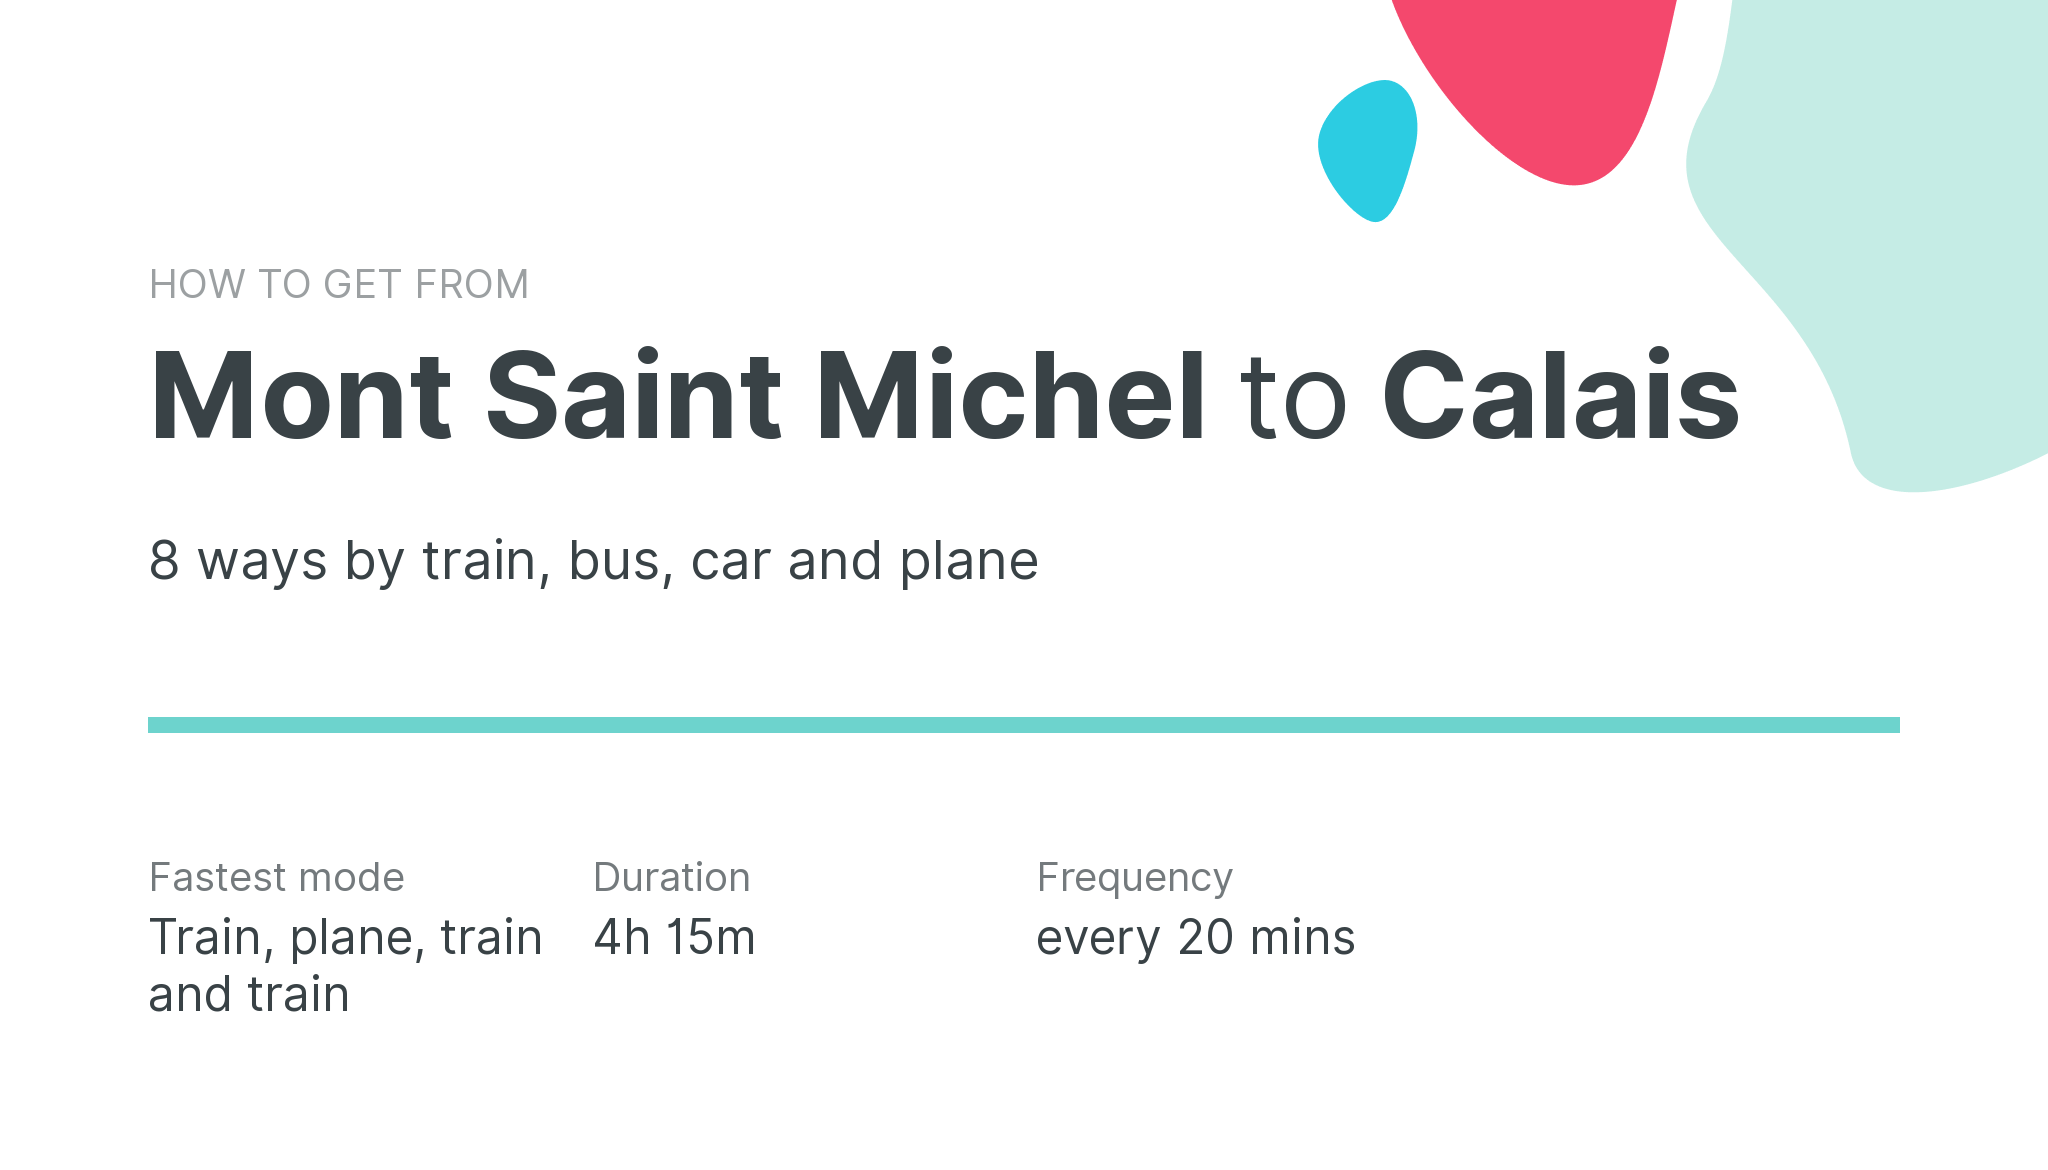 How do I get from Mont Saint Michel to Calais